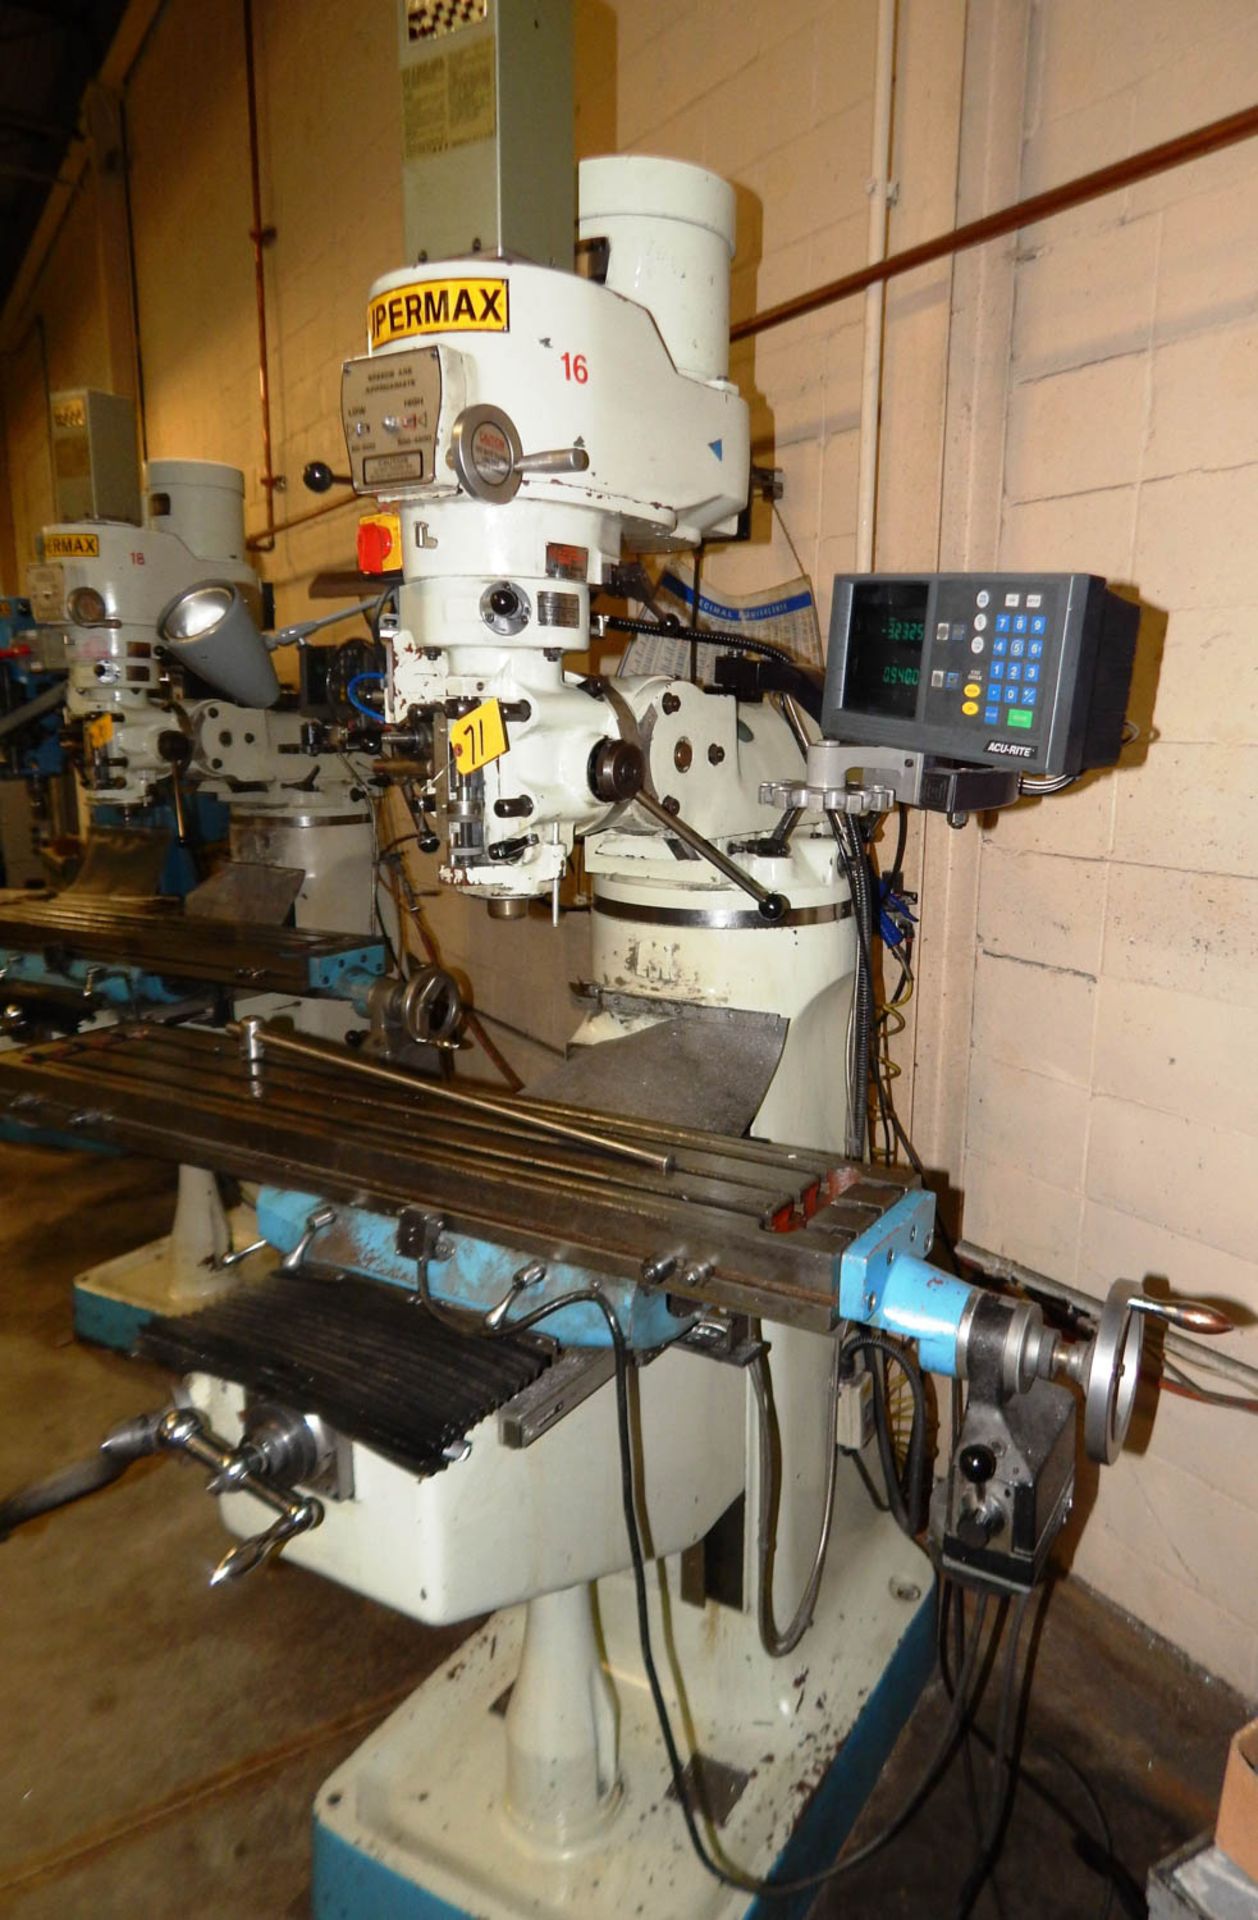 SUPER MAX MDL YC-1 1/2 VS-49 KNEE-TYPE MILLING MACHINE WITH 9'' X 49'' SERVO FEED TABLE, ACU-RITE - Image 2 of 3